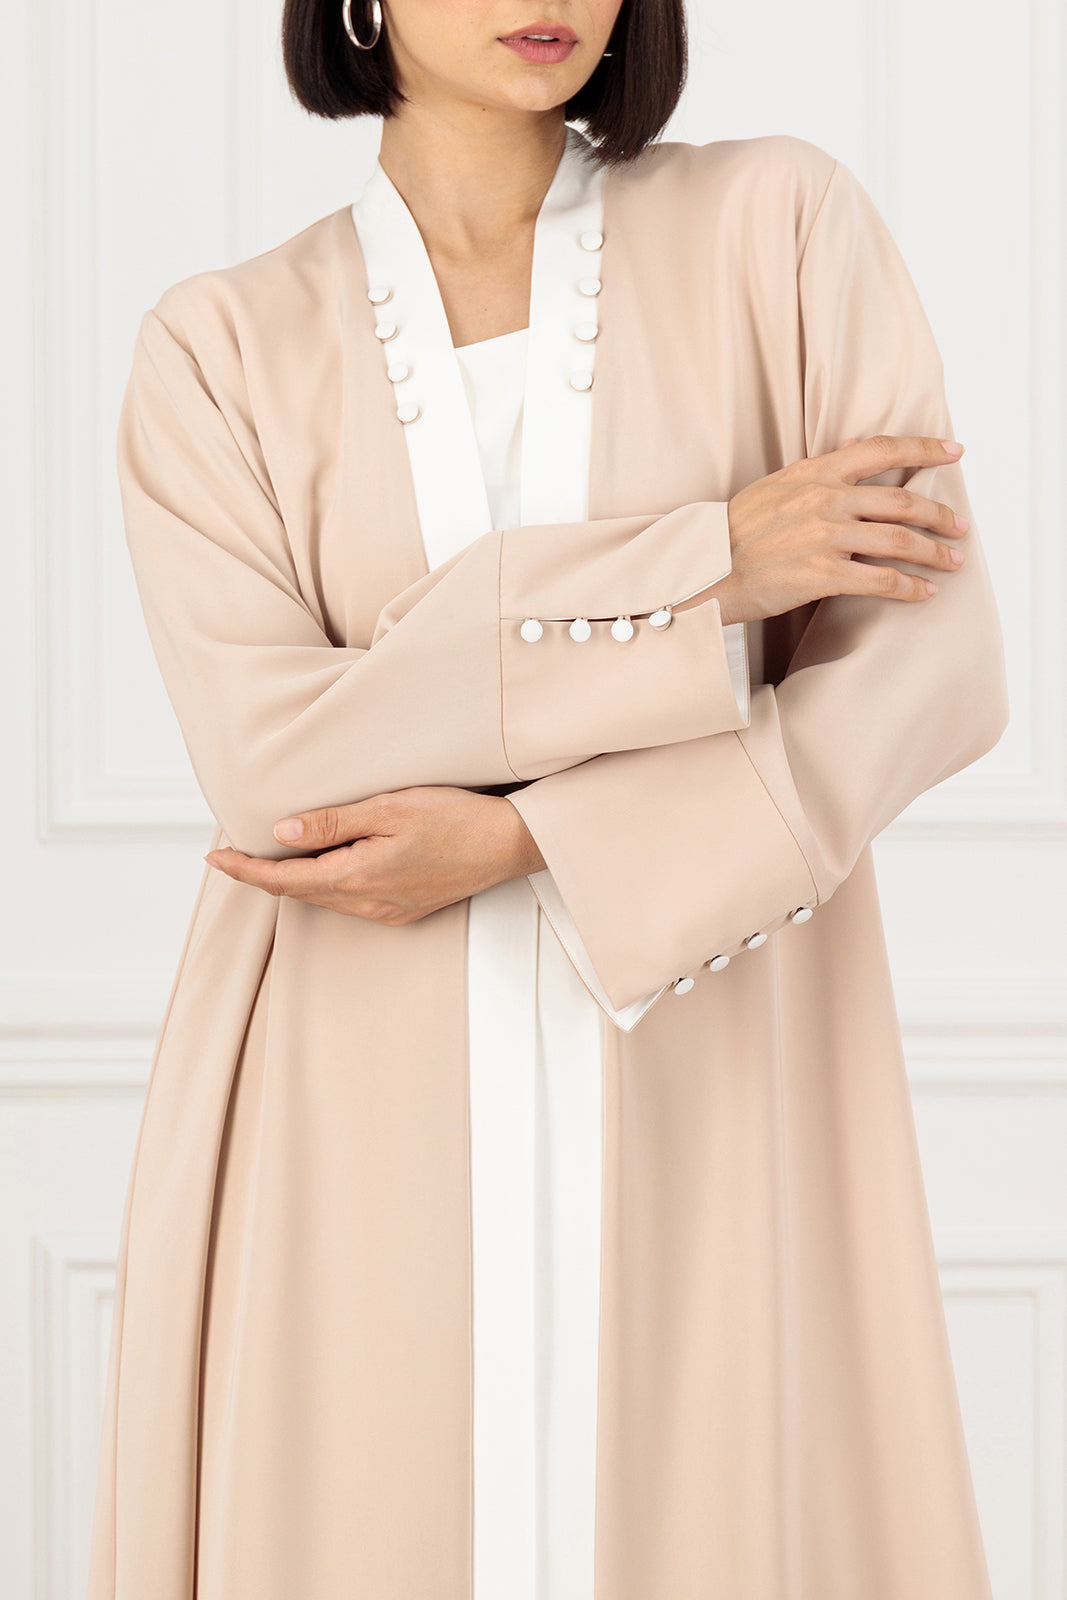 Straight cut Abaya with contrast color block